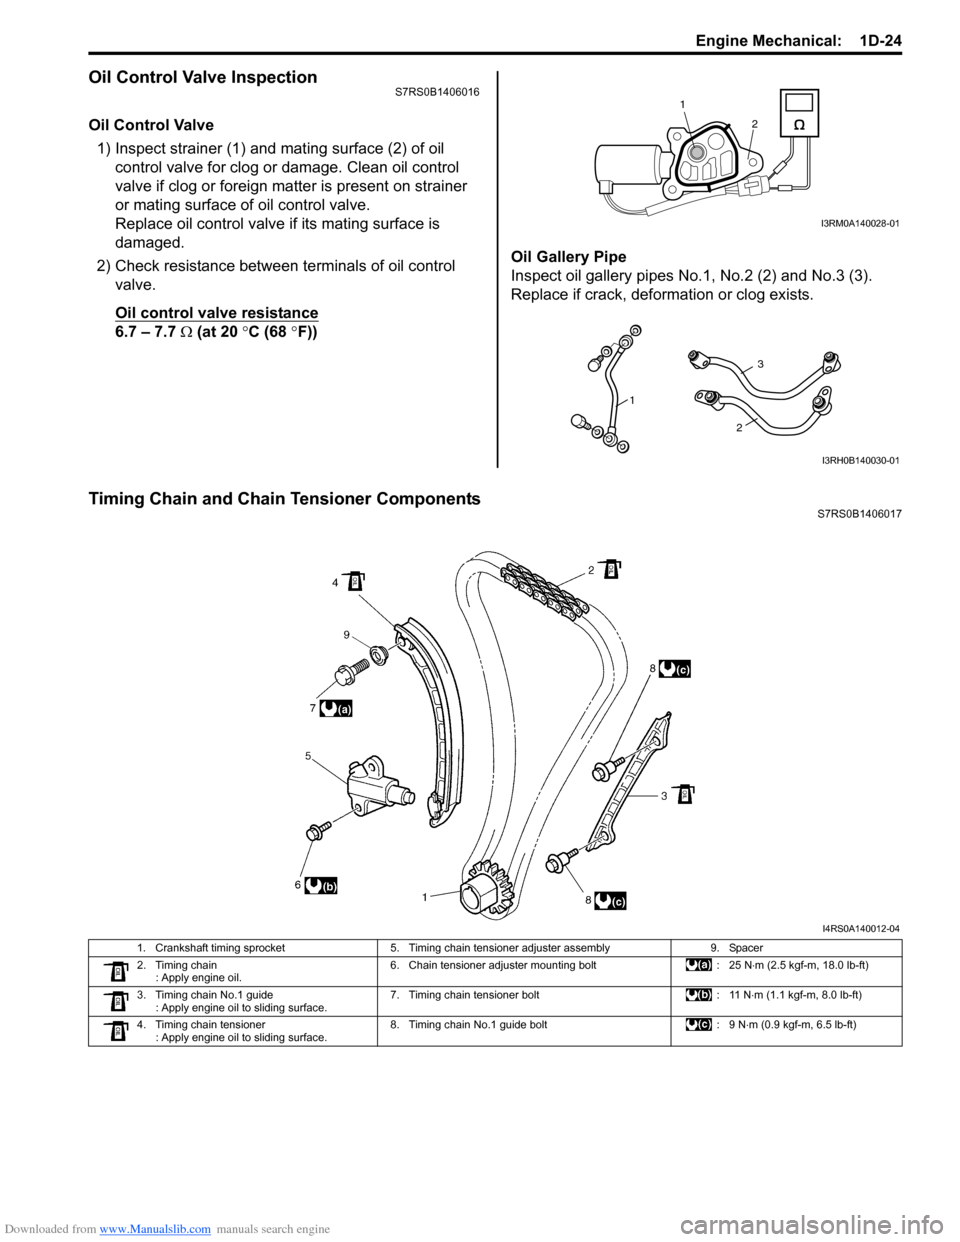 SUZUKI SWIFT 2008 2.G Service Owners Manual Downloaded from www.Manualslib.com manuals search engine Engine Mechanical:  1D-24
Oil Control Valve InspectionS7RS0B1406016
Oil Control Valve1) Inspect strainer (1) and mating surface (2) of oil  con